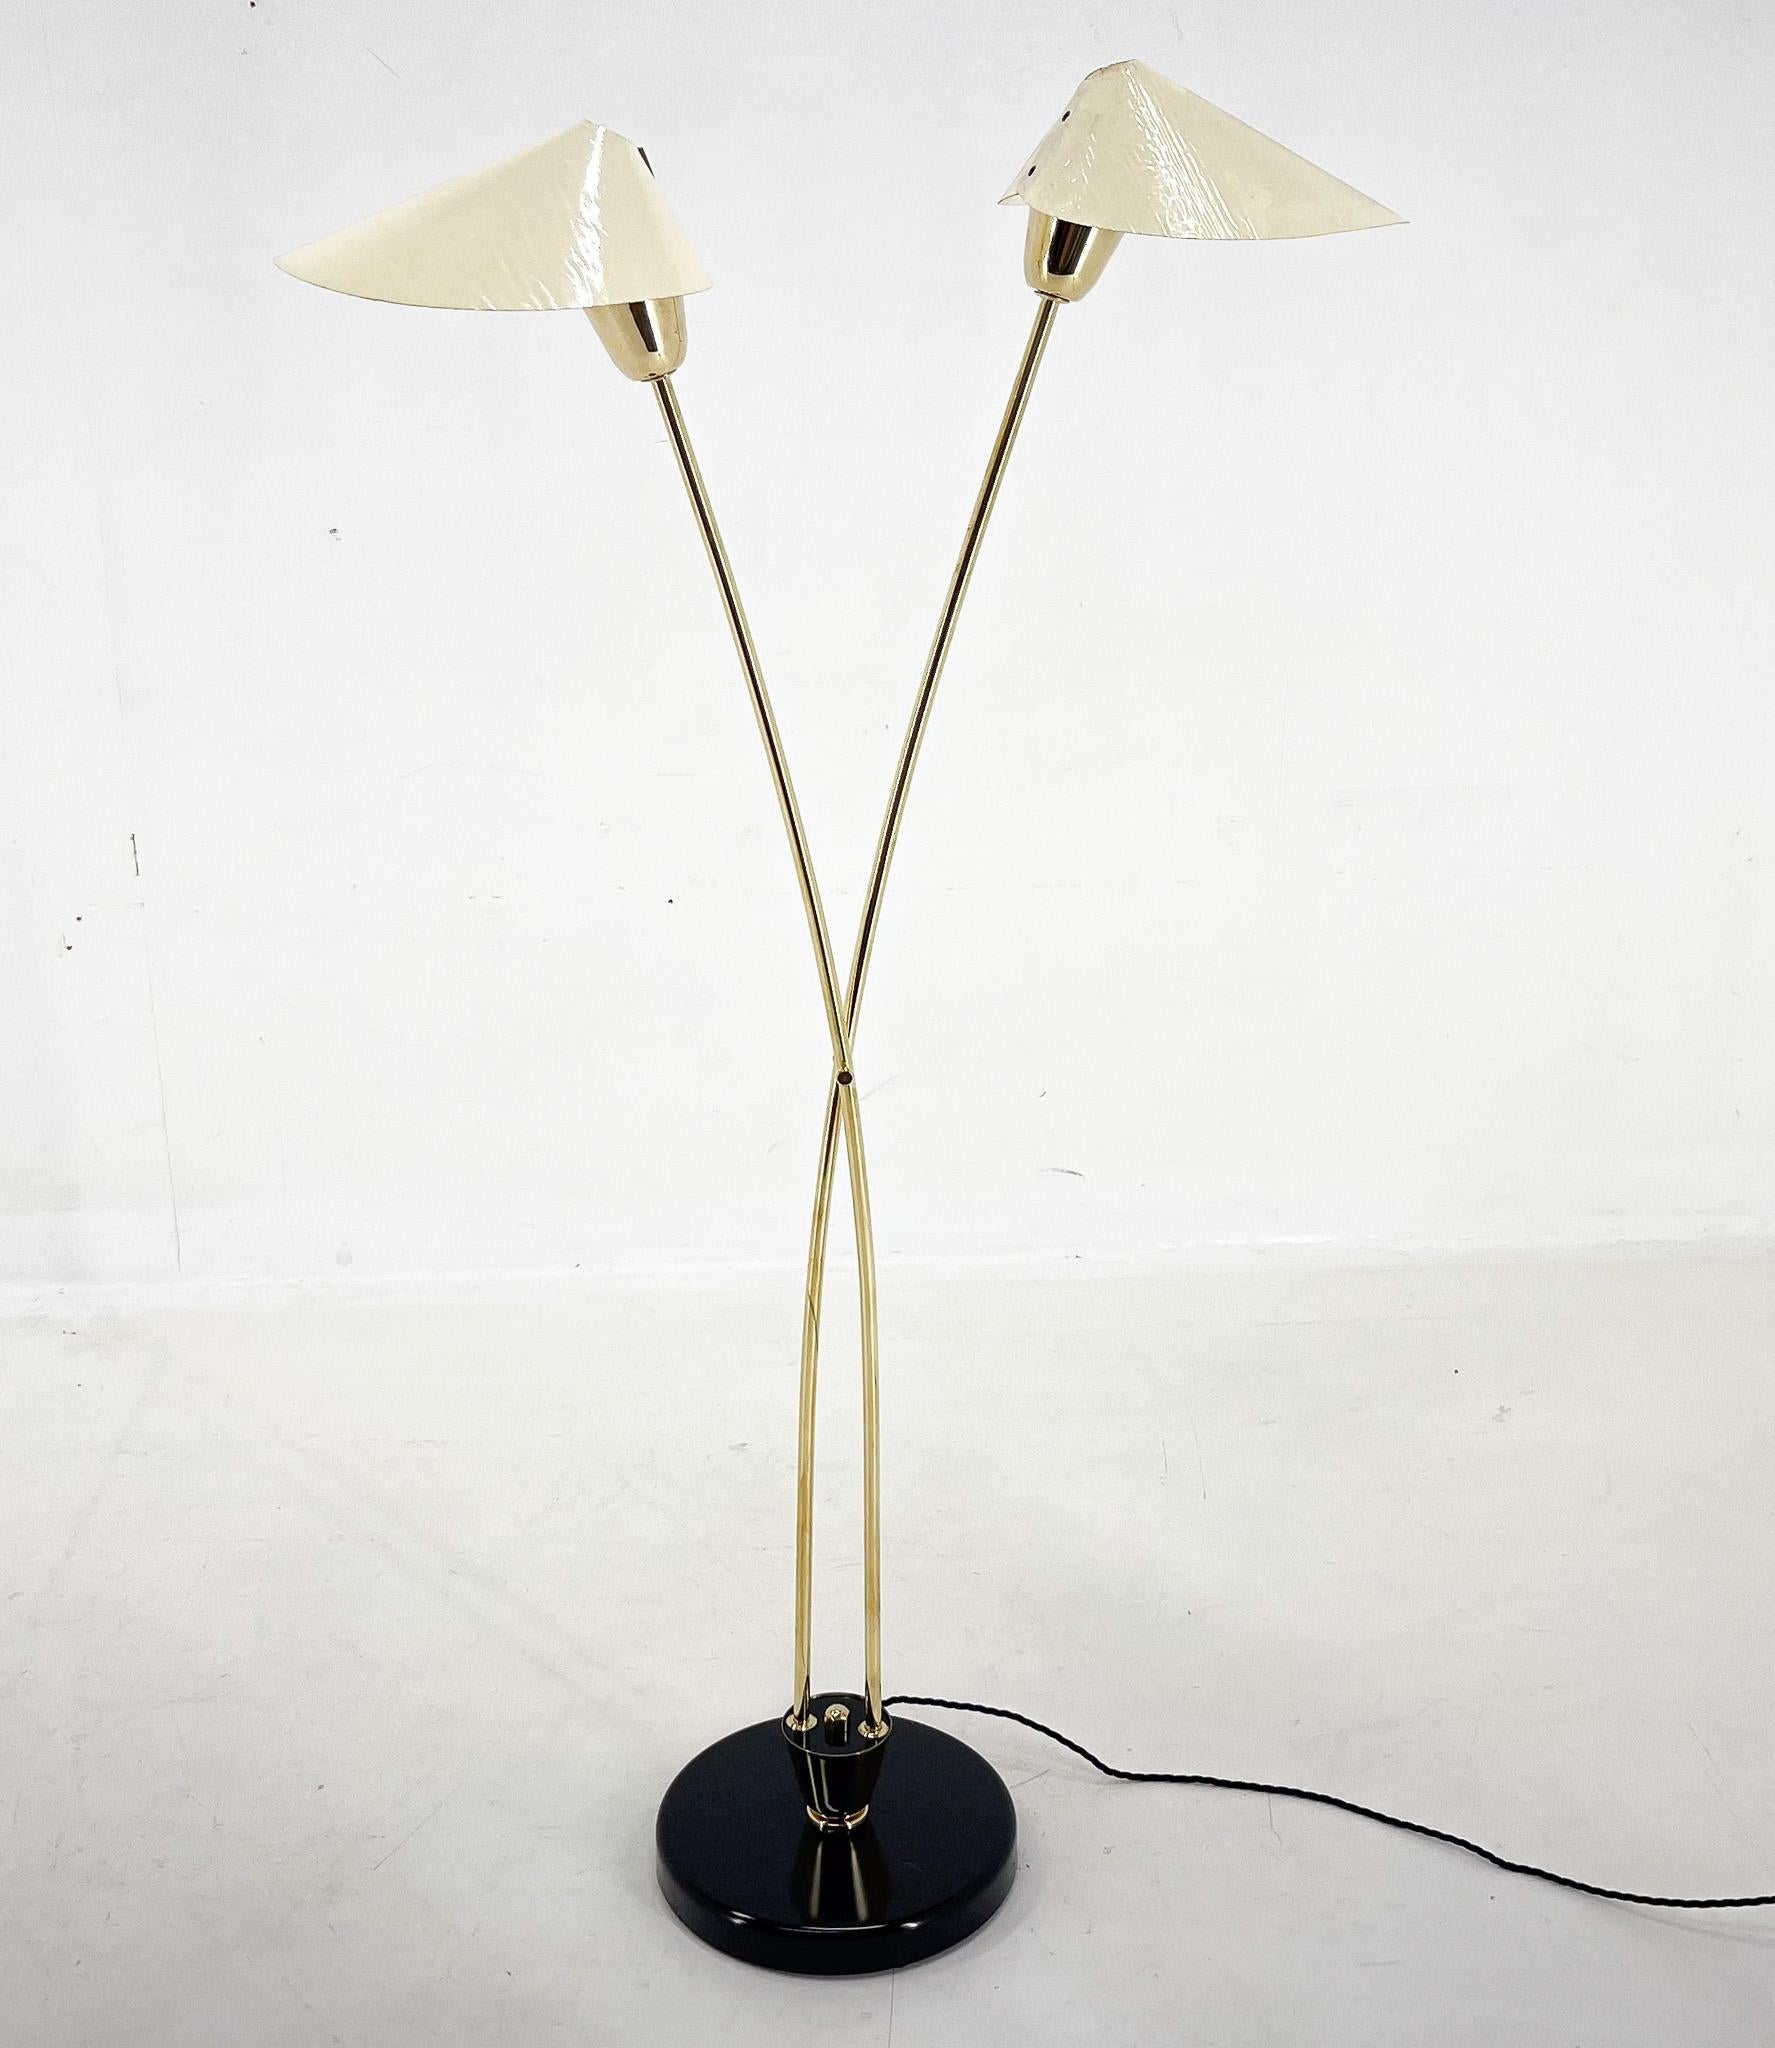 Vintage brass floor lamp called 'Japanese' produced by famous Napako in former Czechoslovakia in the 1960's.  The lamp has been restored. 
Bulb: 2 x E26-E27. 
US plug adapter included.